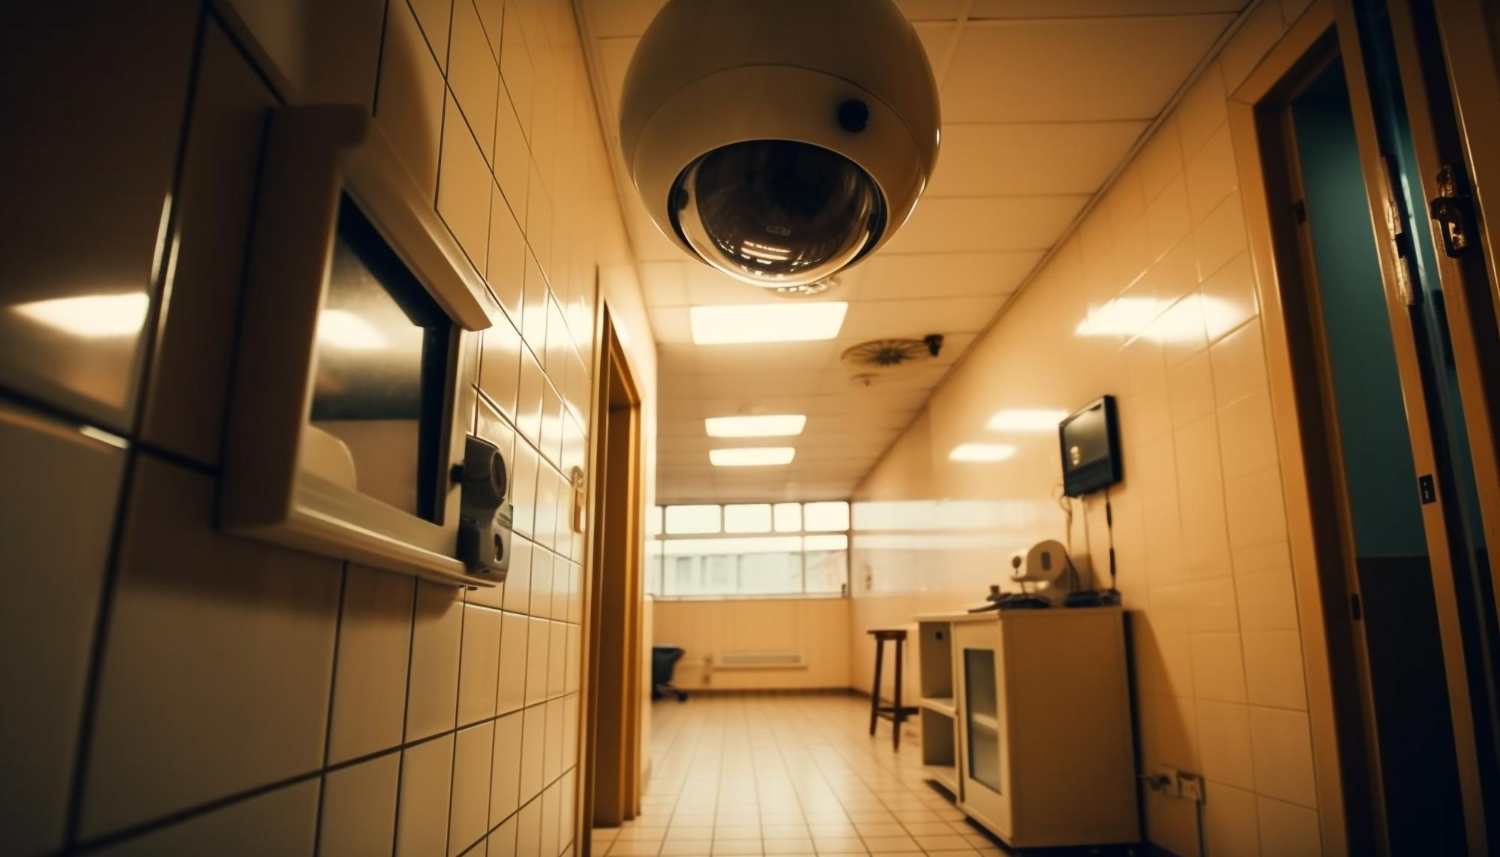 Upgrade Hotel Safety: Choosing the Best Security Cameras